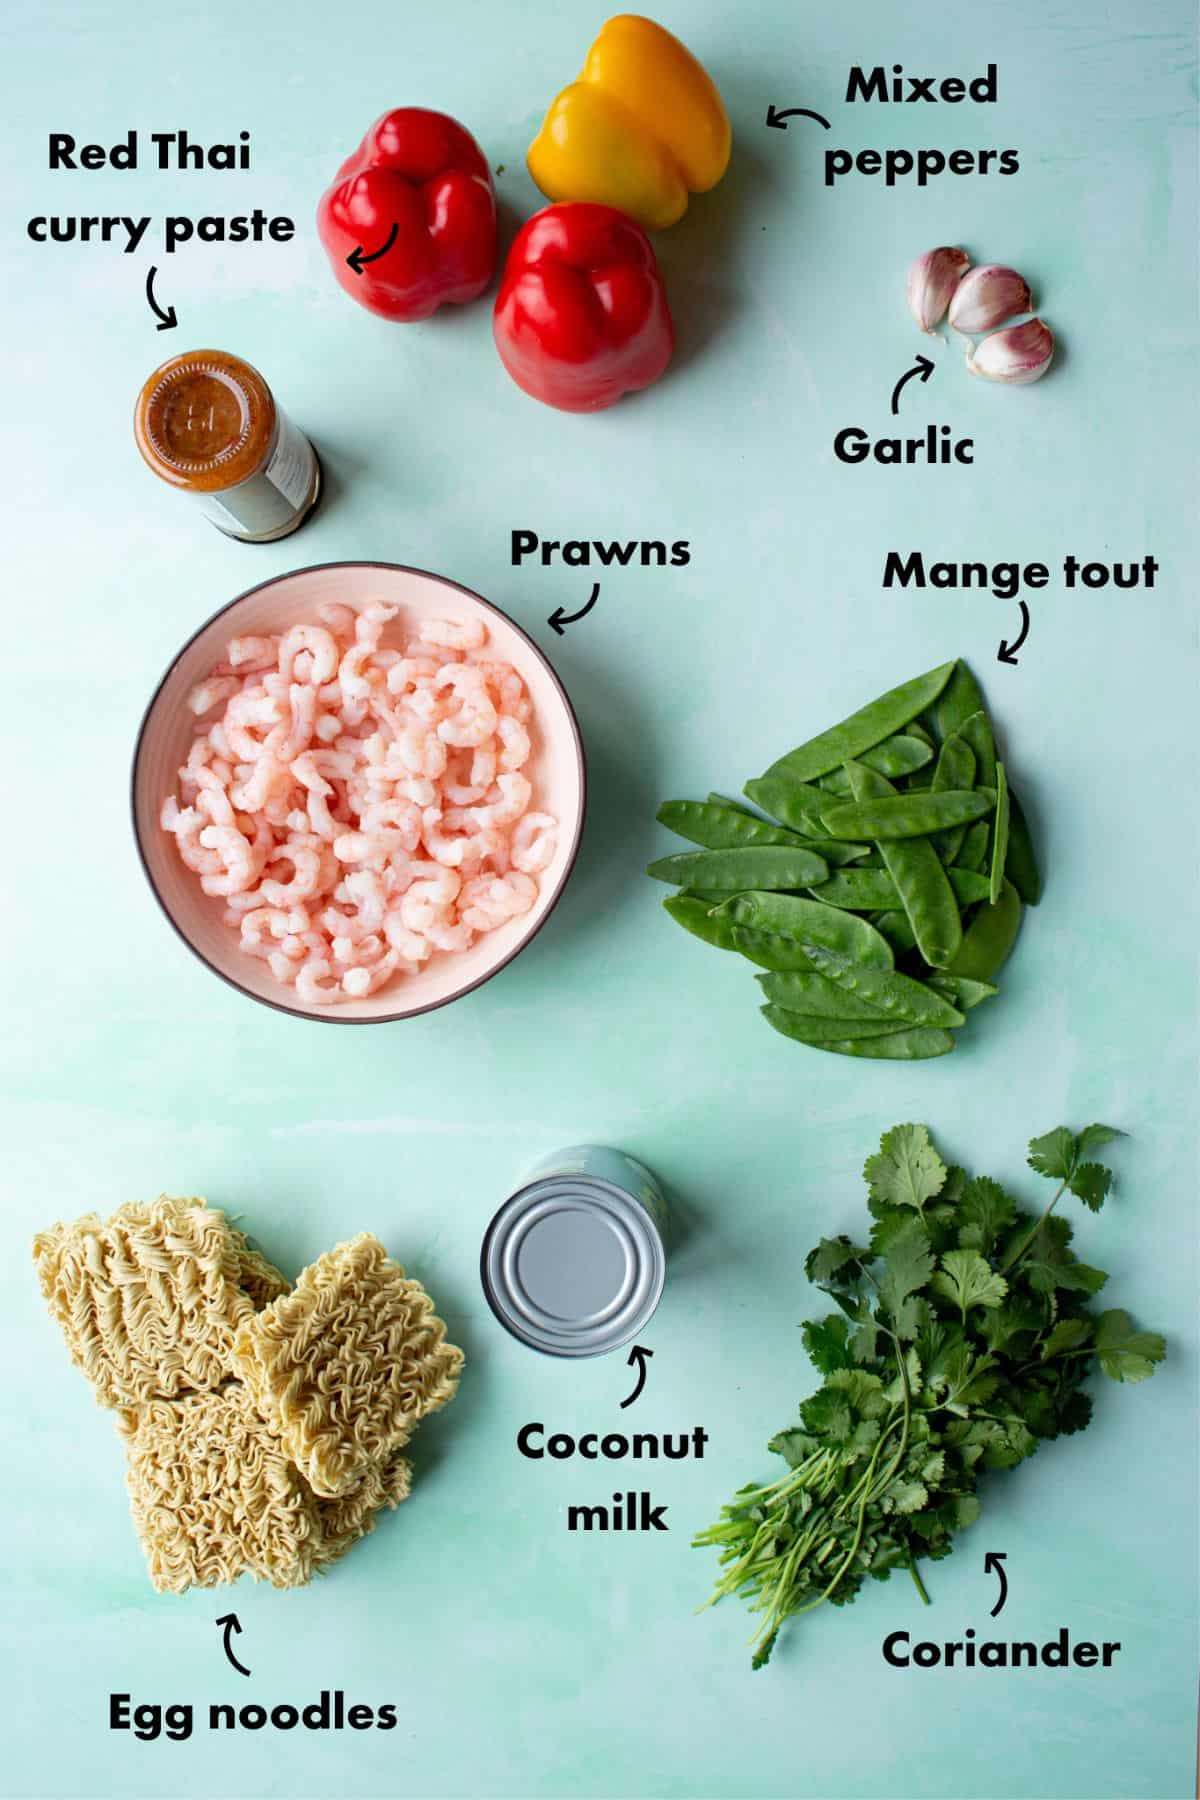 Ingredients to make red prawn  curry laid out on a pale blue background and labelled.